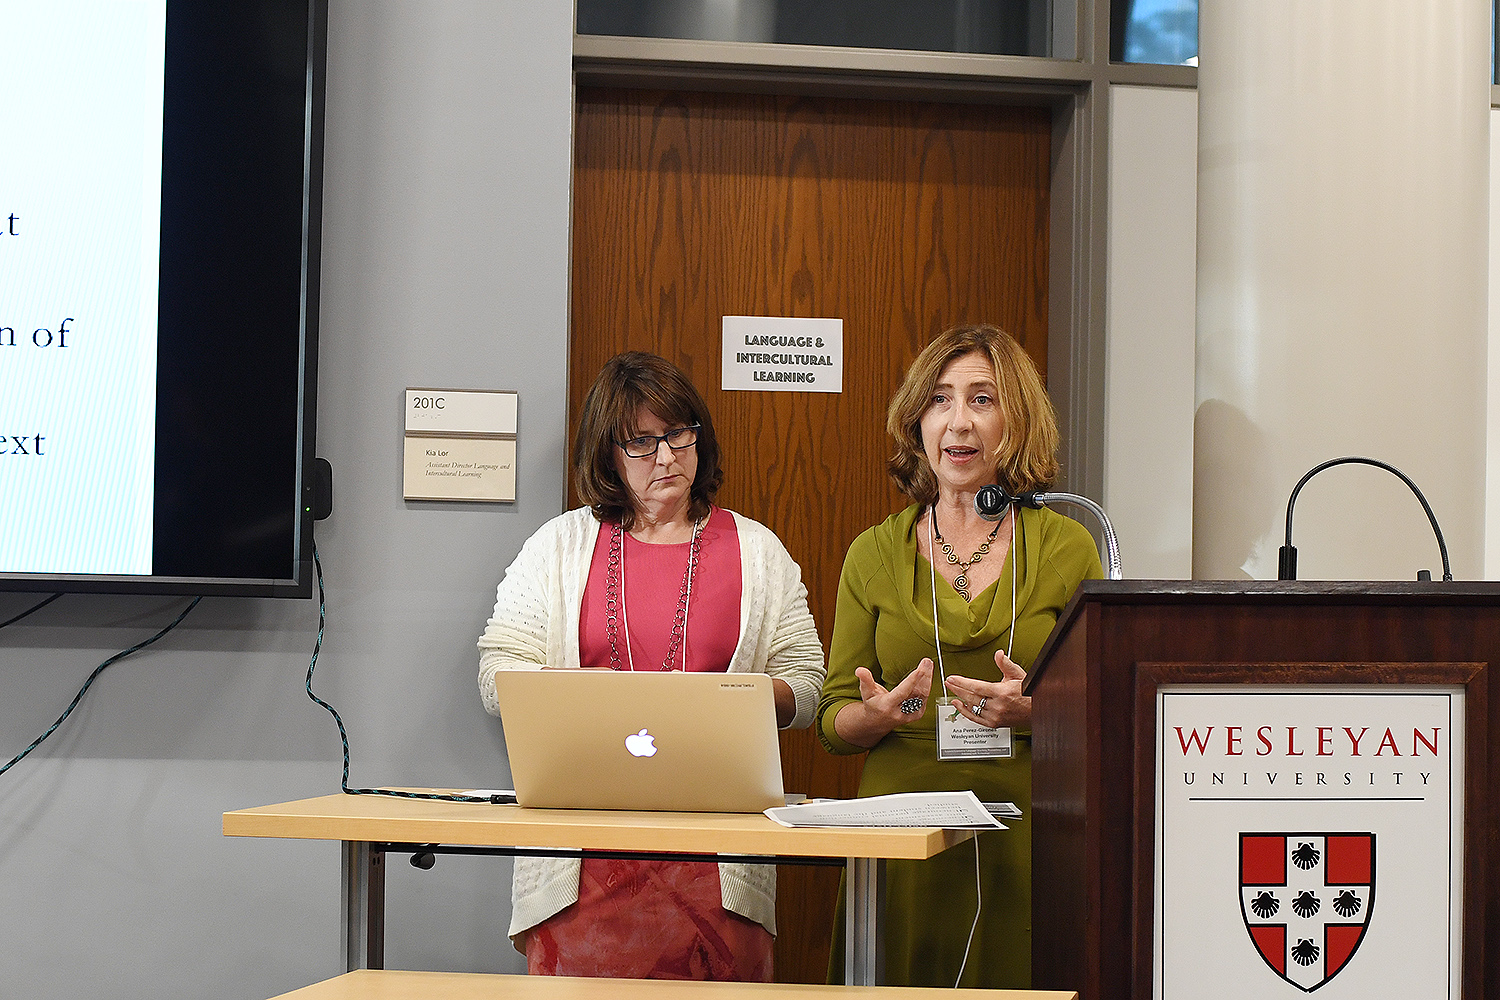 Louise Neary, adjunct associate professor of Spanish and Ana Perez-Girones, adjunct professor of Spanish, shared how students at Wesleyan are building Spanish language portfolios using a Mahara language pack. Perez-Girones also led a discussion on Wespañol, an intermediate-level online program for independent learners.